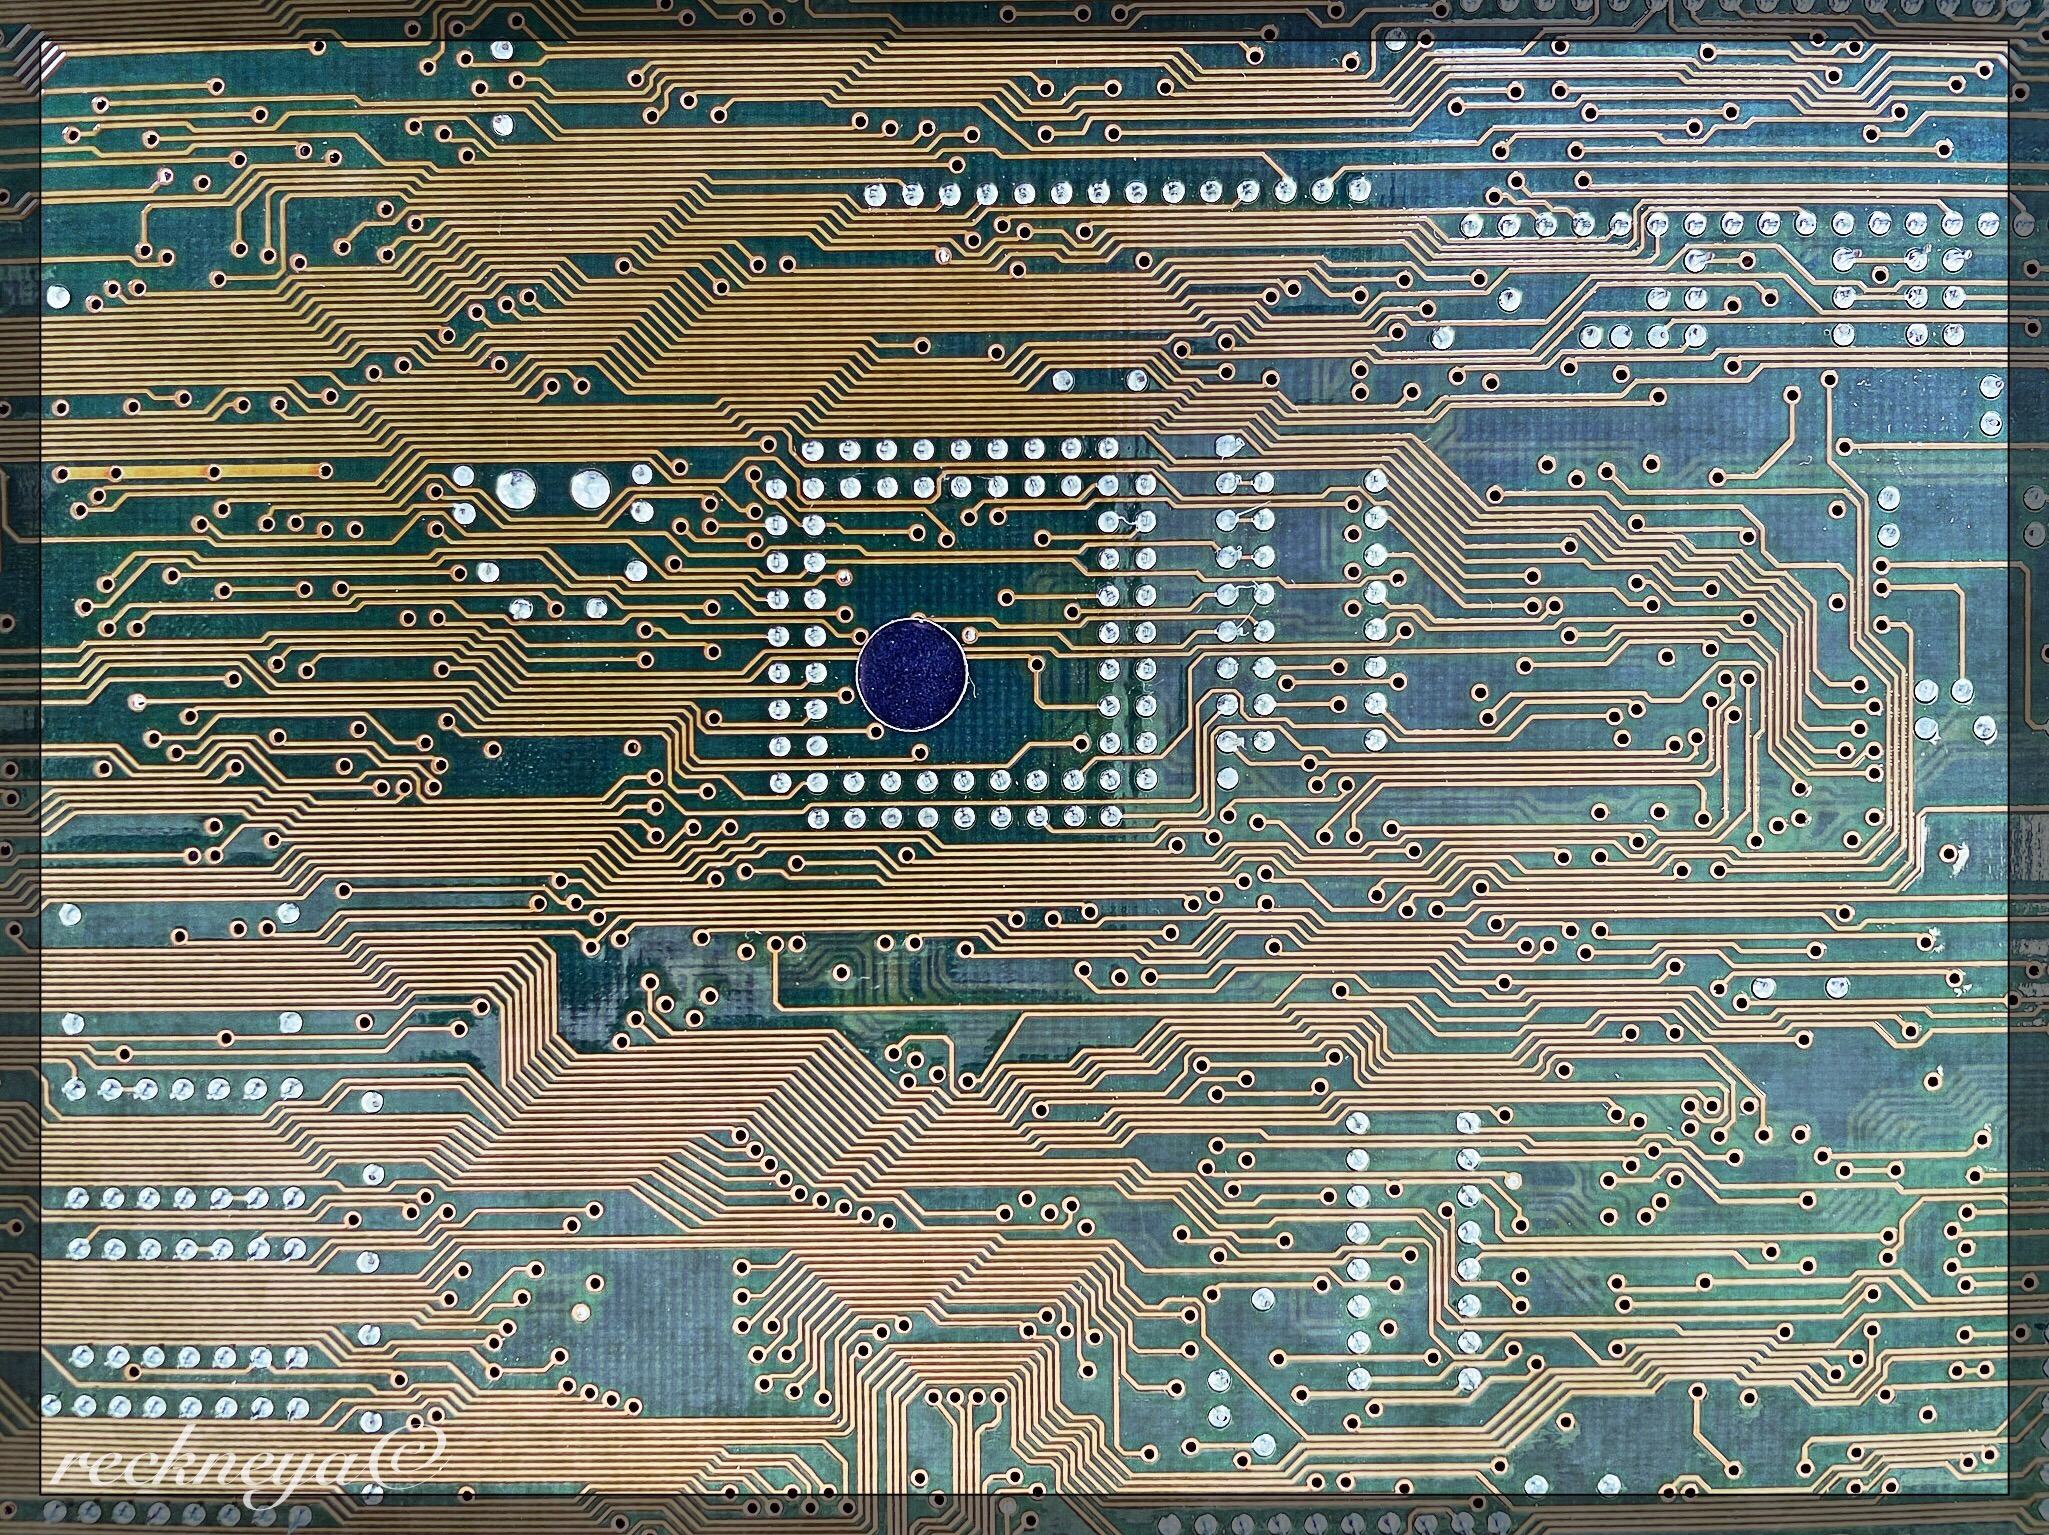 Photo taken at my old work. I think it is the circuit board of an old laptop. Though it looks quite high tech, it is a relic in modern technology. Our technological capabilities far surpass this level. We can make these things so much smaller now. But that is why I used this photo here, cause it shows such a high level of detail still. Anyone can see this was a complicated machine. This image in a way illustrates how most are completely oblivious to the level where technology is at now and by default therefore where it is going.